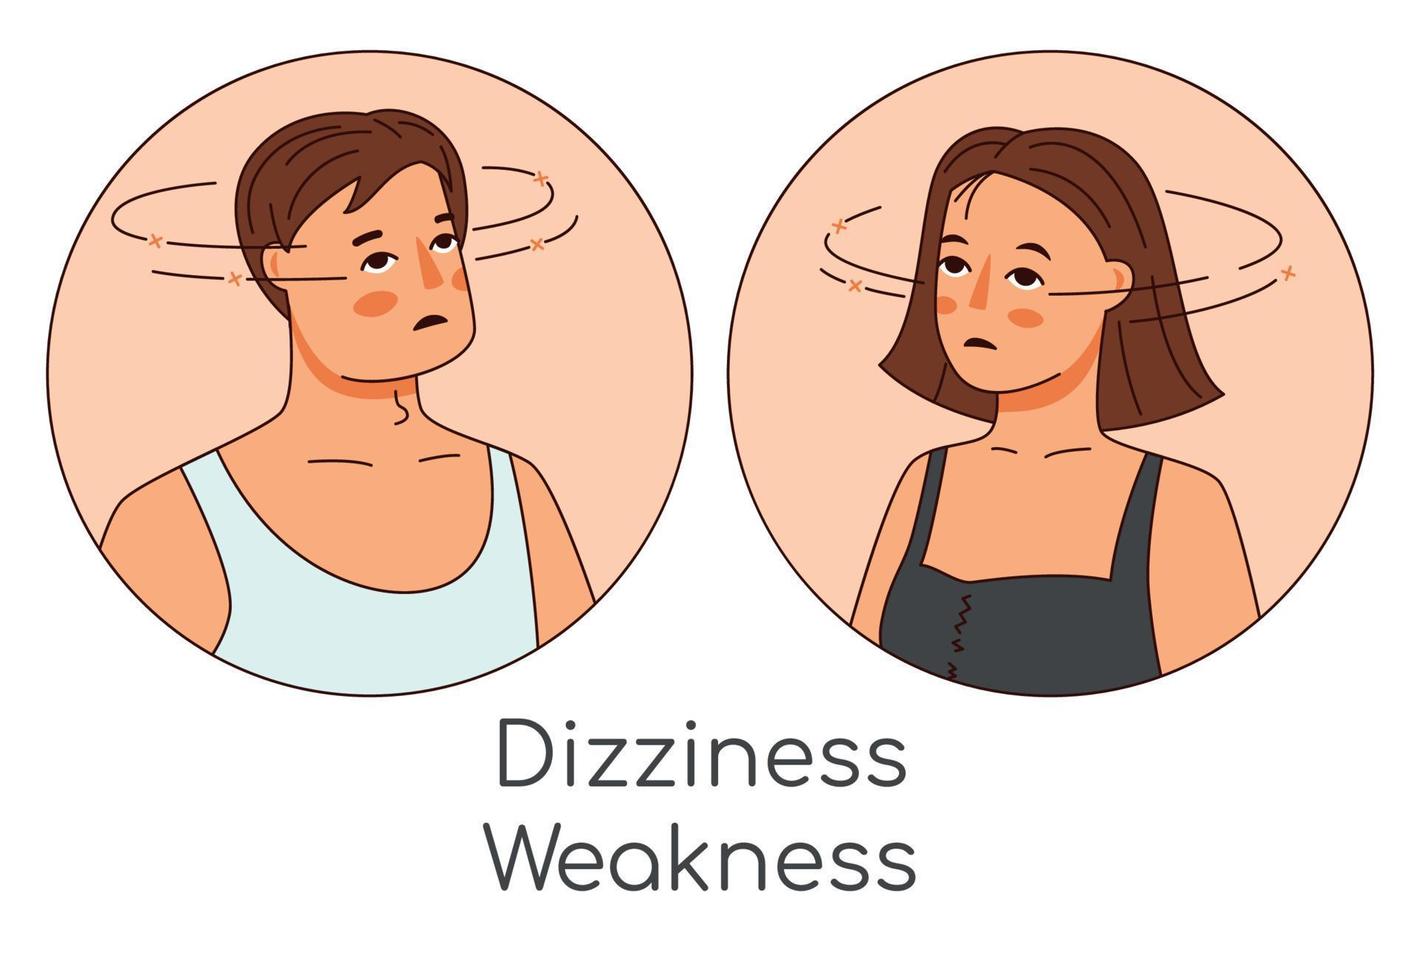 Icons of man and woman with weakness and dizziness vector